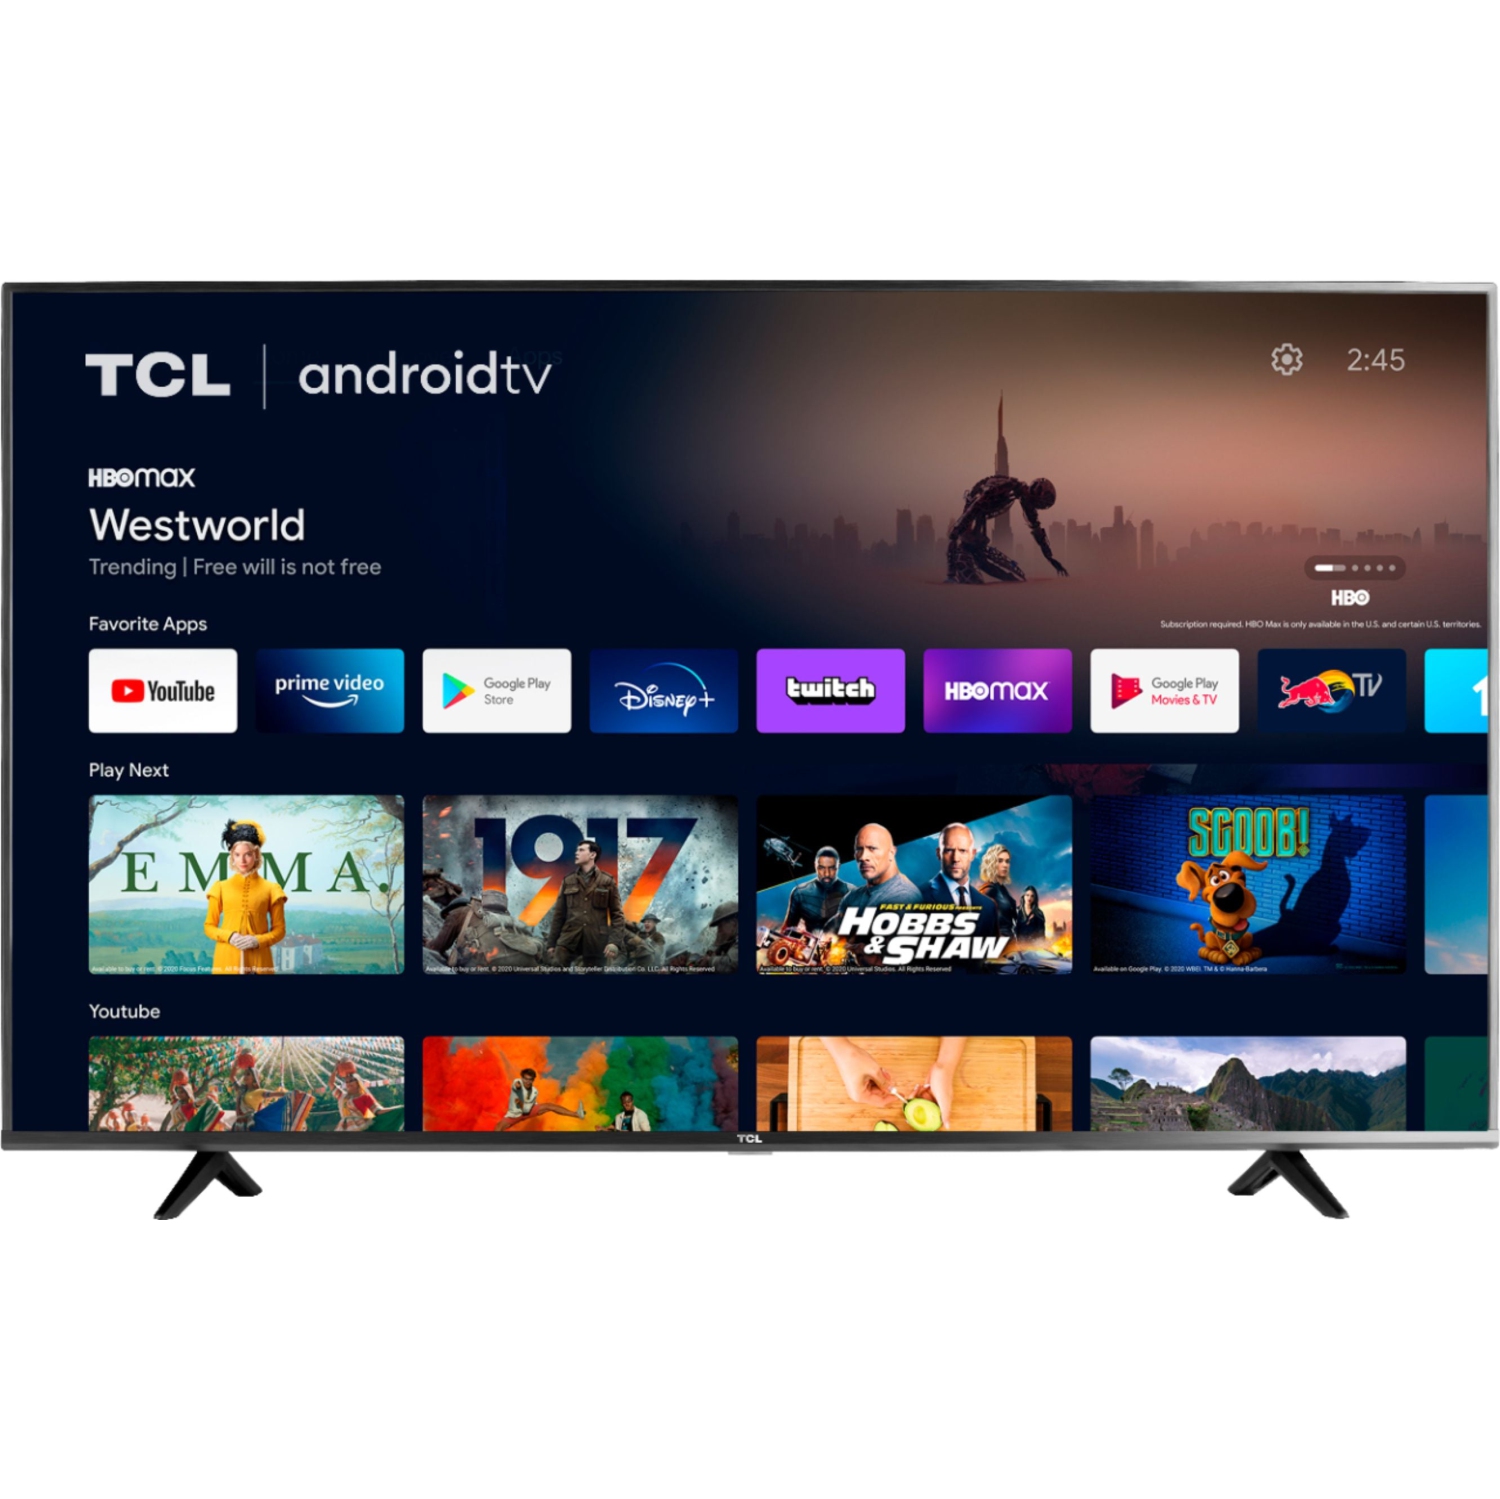 Refurbished (Good) - TCL 43" Class 4-Series 4K UHD HDR Android Smart TV (43S434)